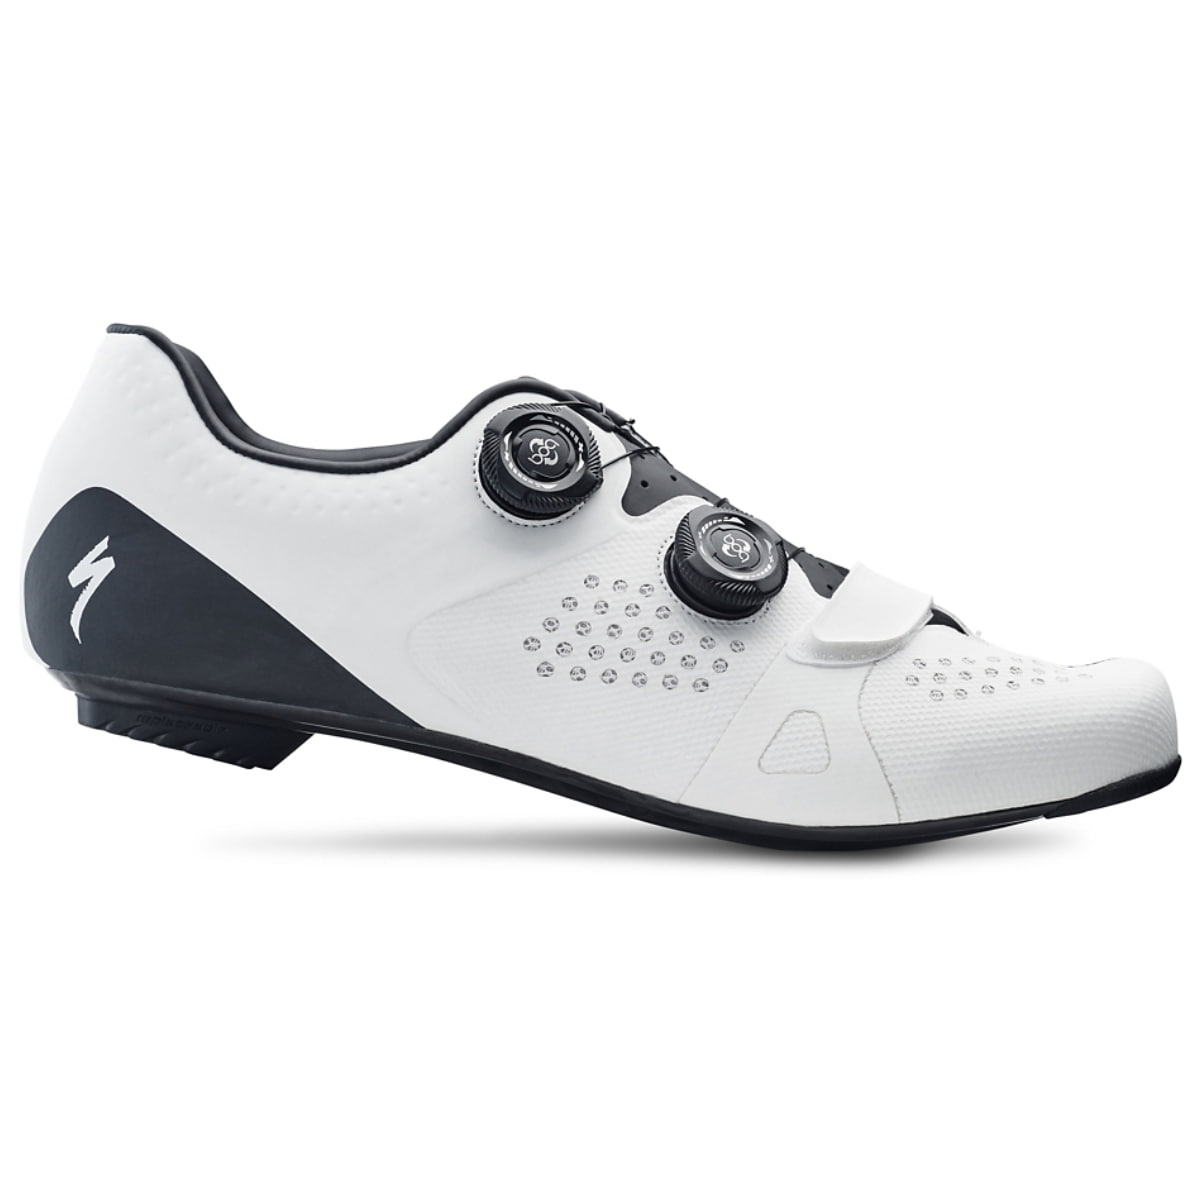 CHAUSSURES SPECIALIZED TORCH 3.0